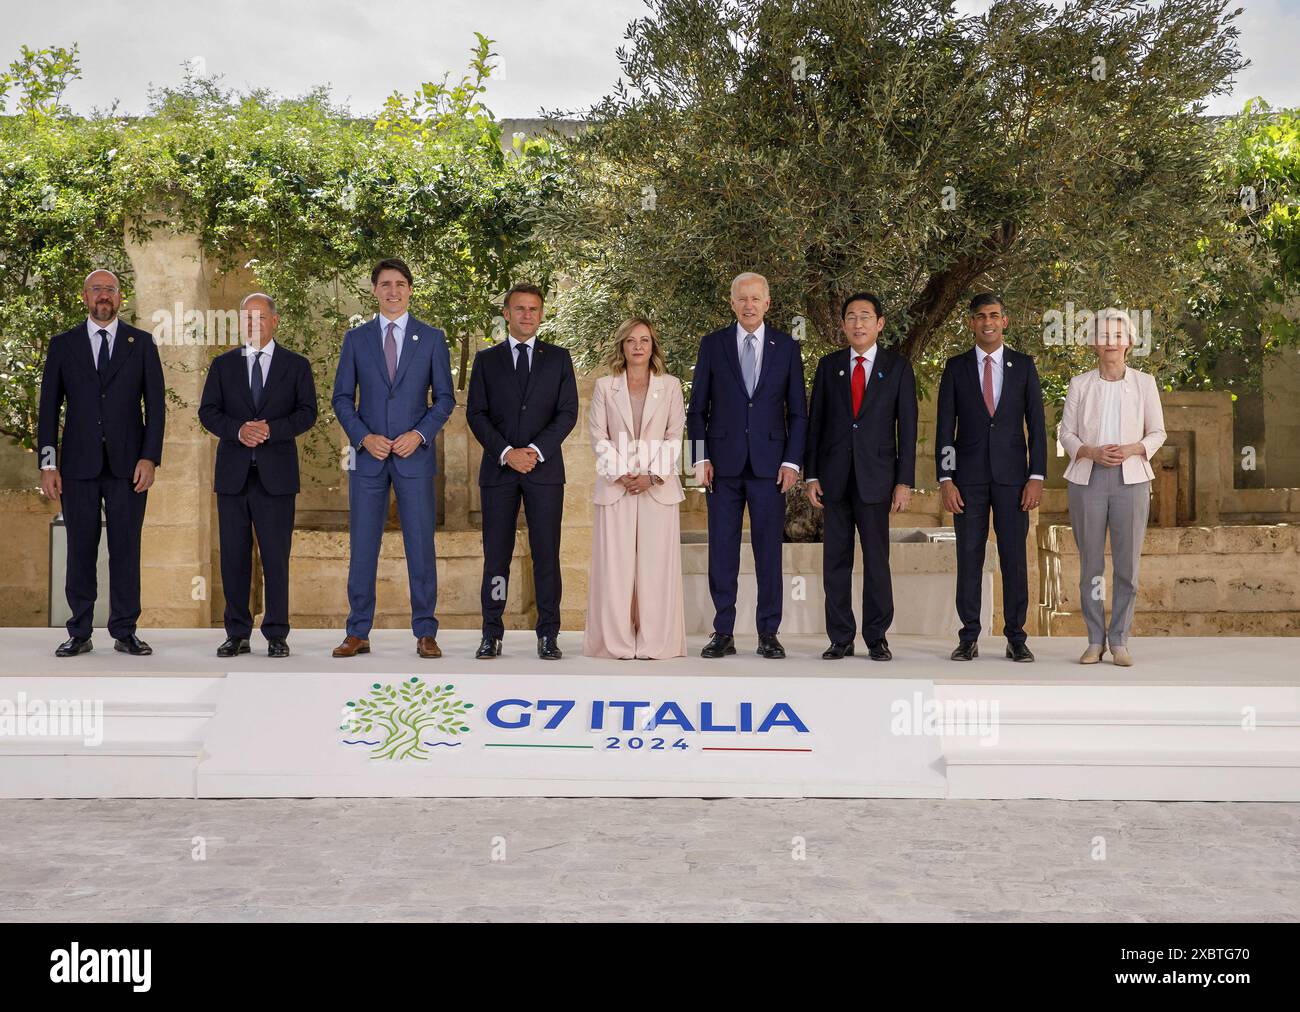 Fasano, Italy. 13th June, 2024. European Council President Charles Michel, German Chancellor Olaf Scholz, Canadian Prime Minister Justin Trudeau, French President Emmanuel Macron, Italian Prime Minister Giorgia Meloni, U.S. President Joe Biden, Japanese Prime Minister Fumio Kishida, British Prime Minister Rishi Sunak and European Commission President Ursula von der Leyen pose for a family photo during a welcome ceremony on day one of the 50th G7 summit at Borgo Egnazia, Italy on June 13, 2024. Photo by (EV) /ABACAPRESS.COM Credit: Abaca Press/Alamy Live News Stock Photo